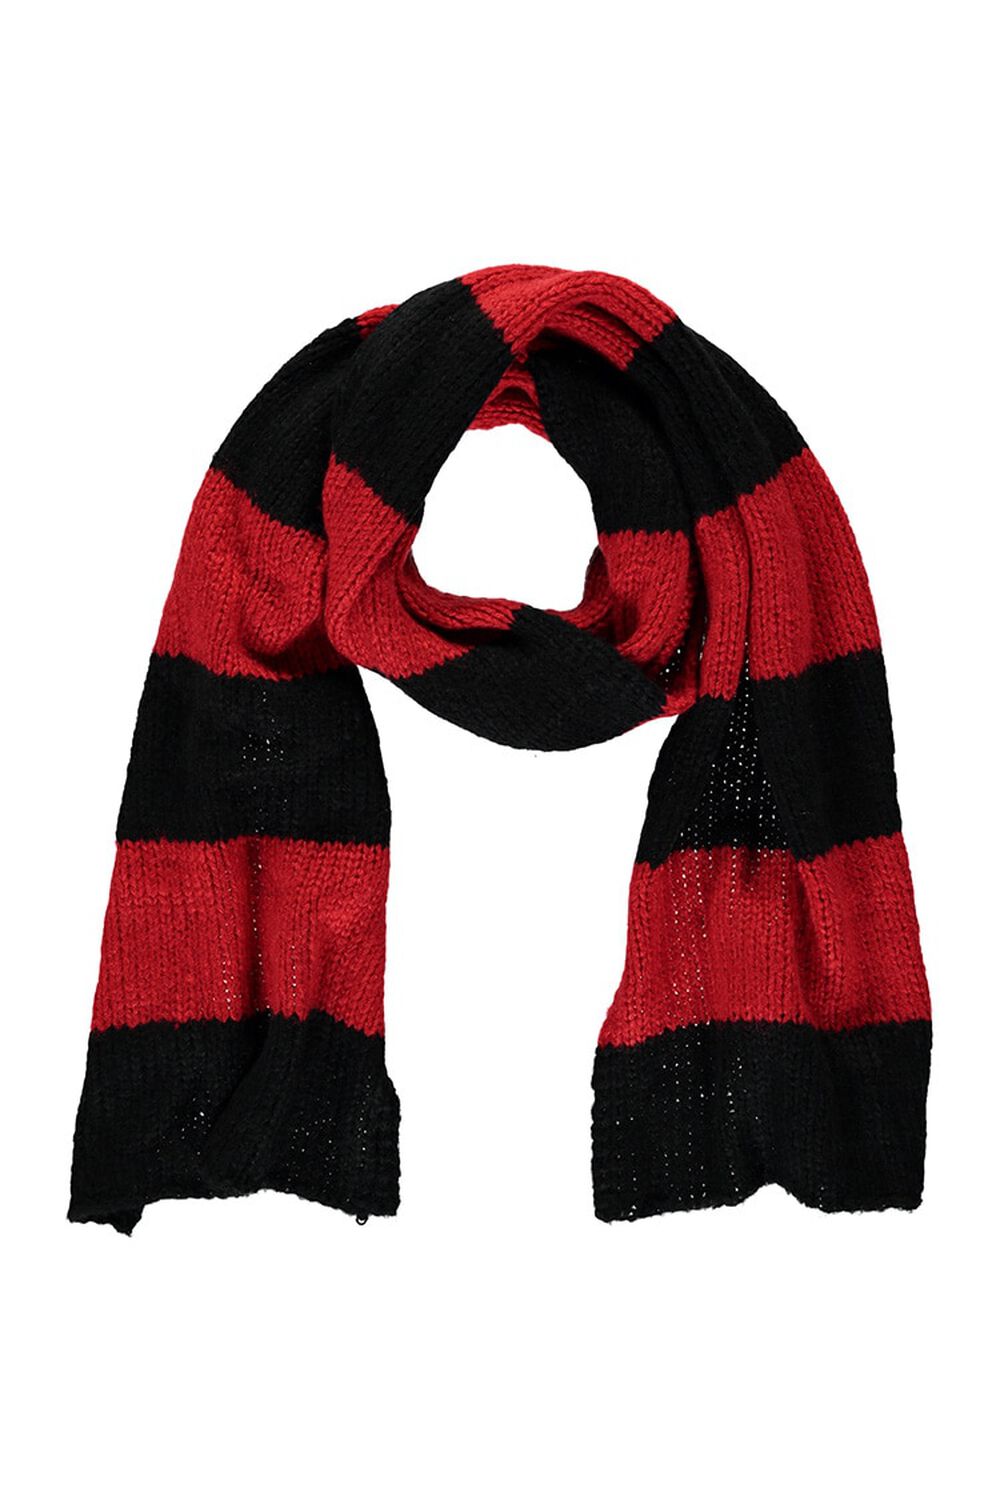 Colorblock Oblong Scarf, image 1